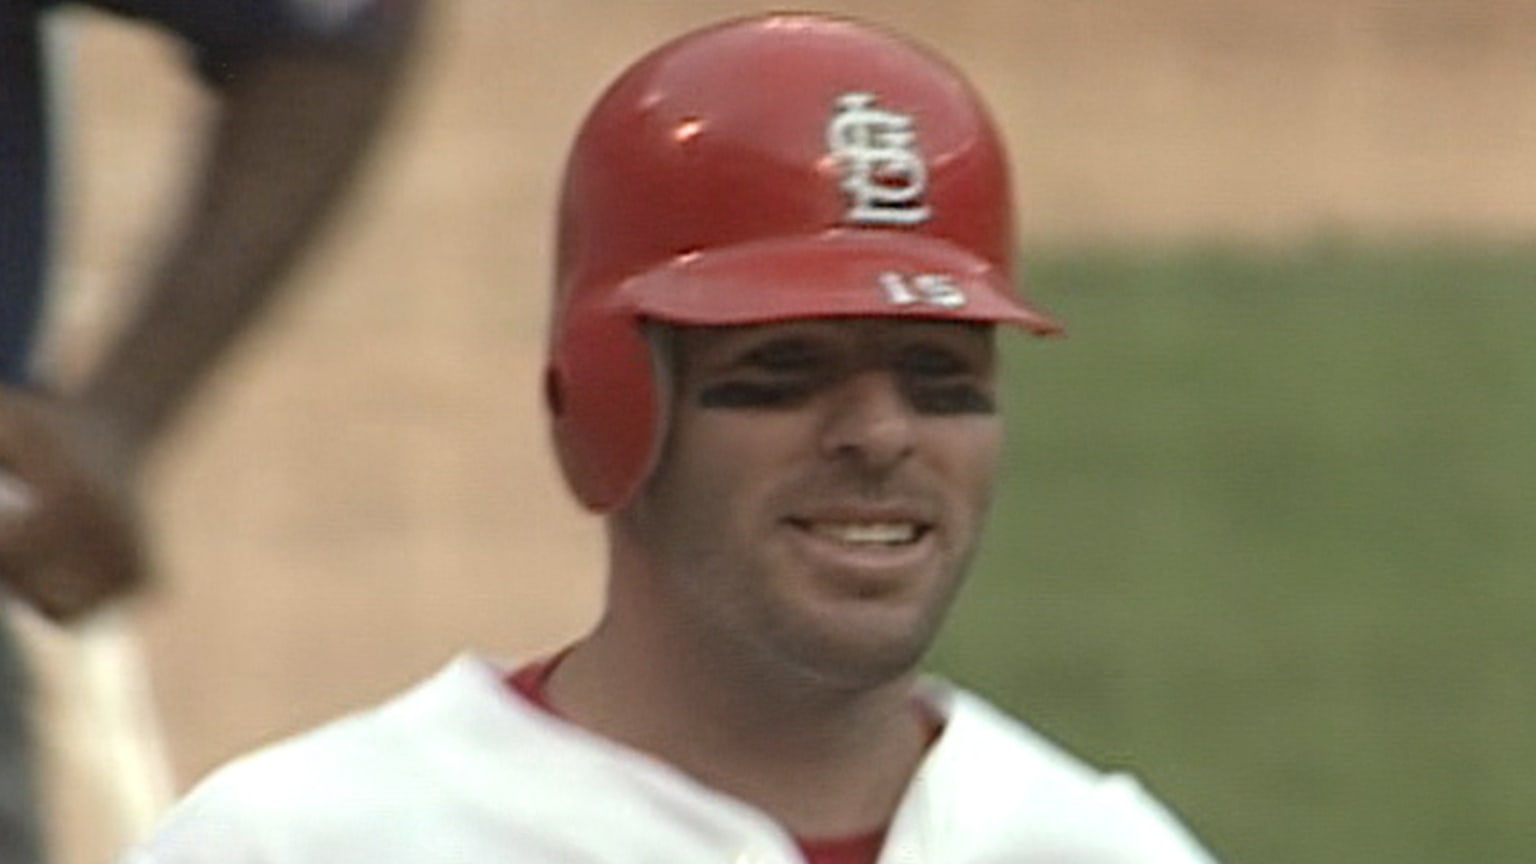 Jim Edmonds hits a two-run walk-off homer in the 12th inning